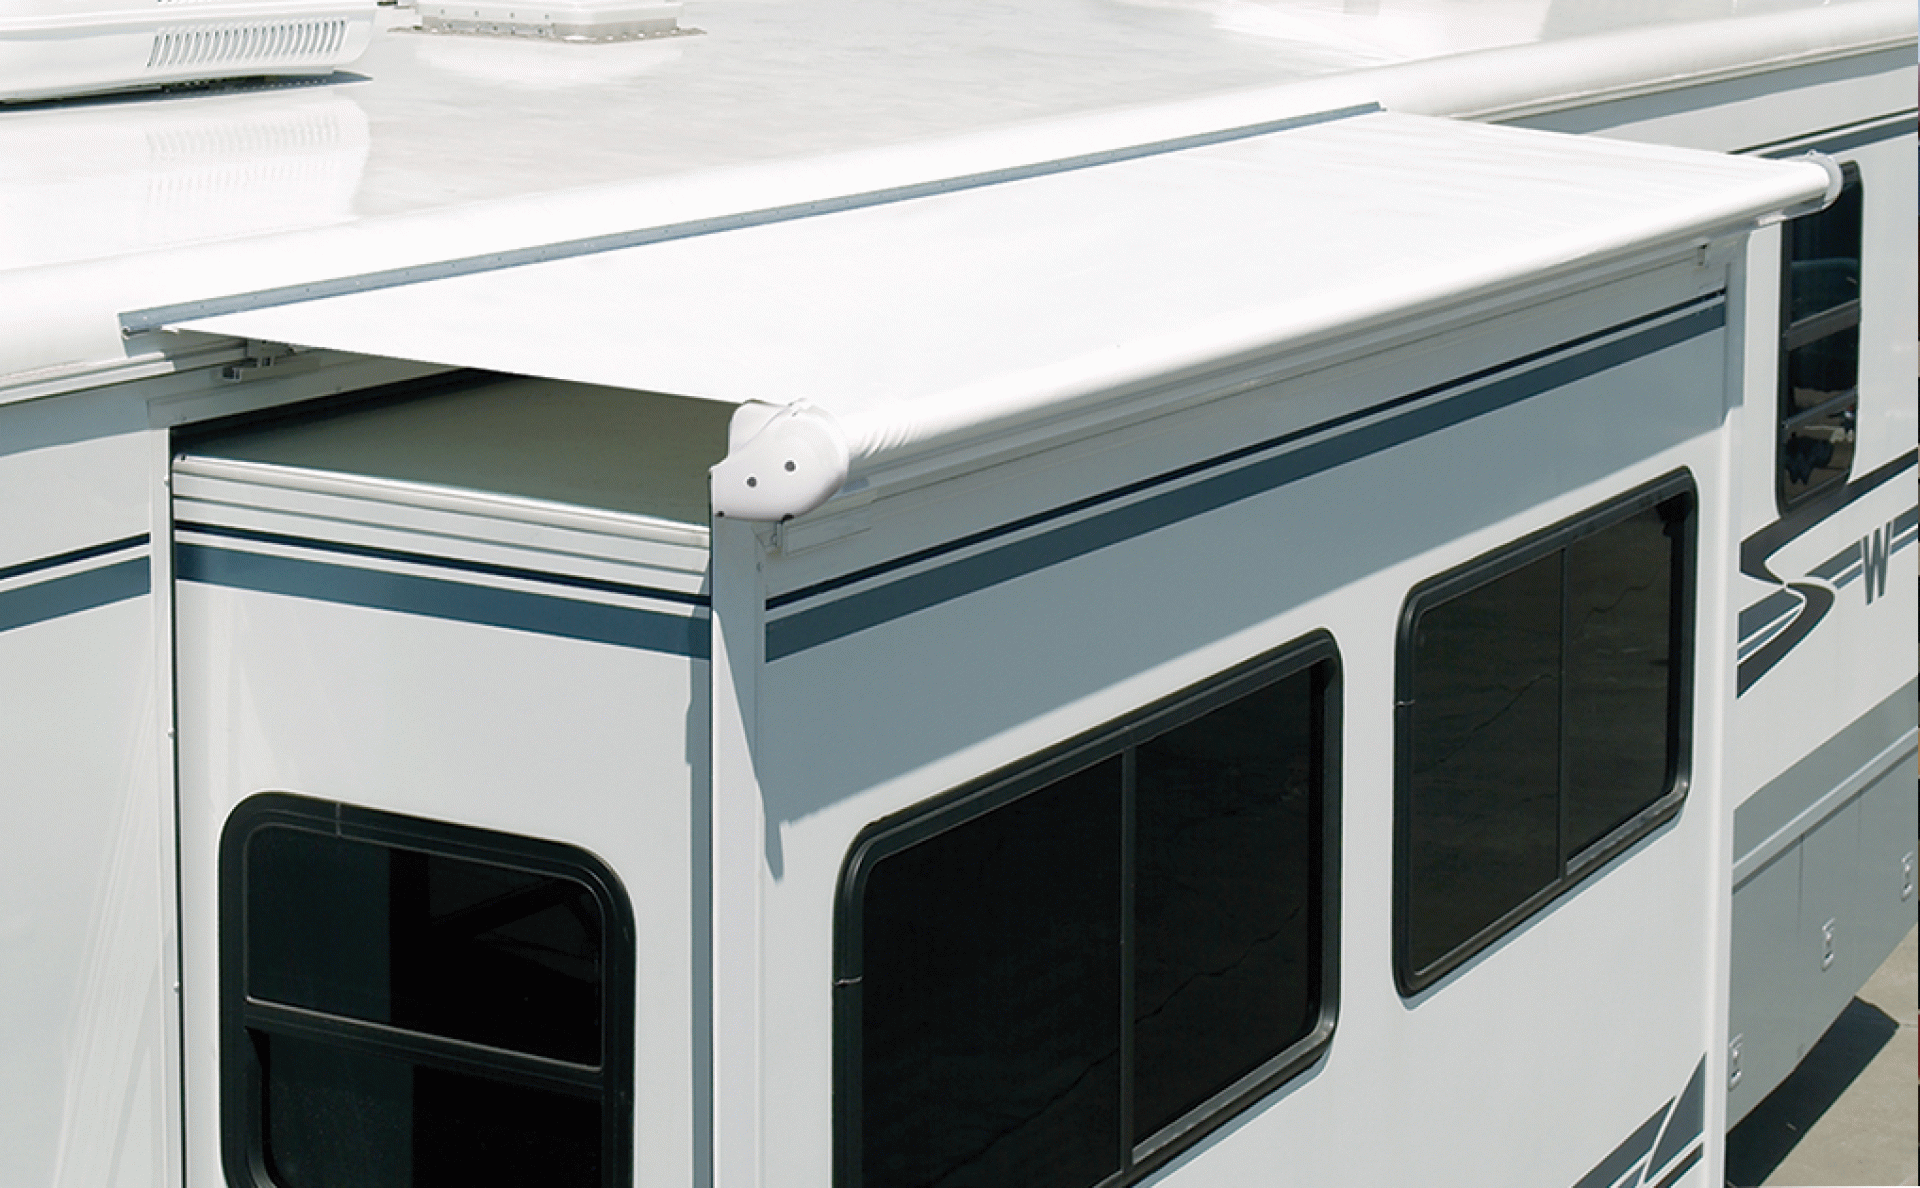 CAREFREE OF COLORADO | UQ1810025 | SIDEOUT KOVER III AWNING 174" - 181" ROOF RANGE WHITE VINYL FABRIC & DEFLECTOR